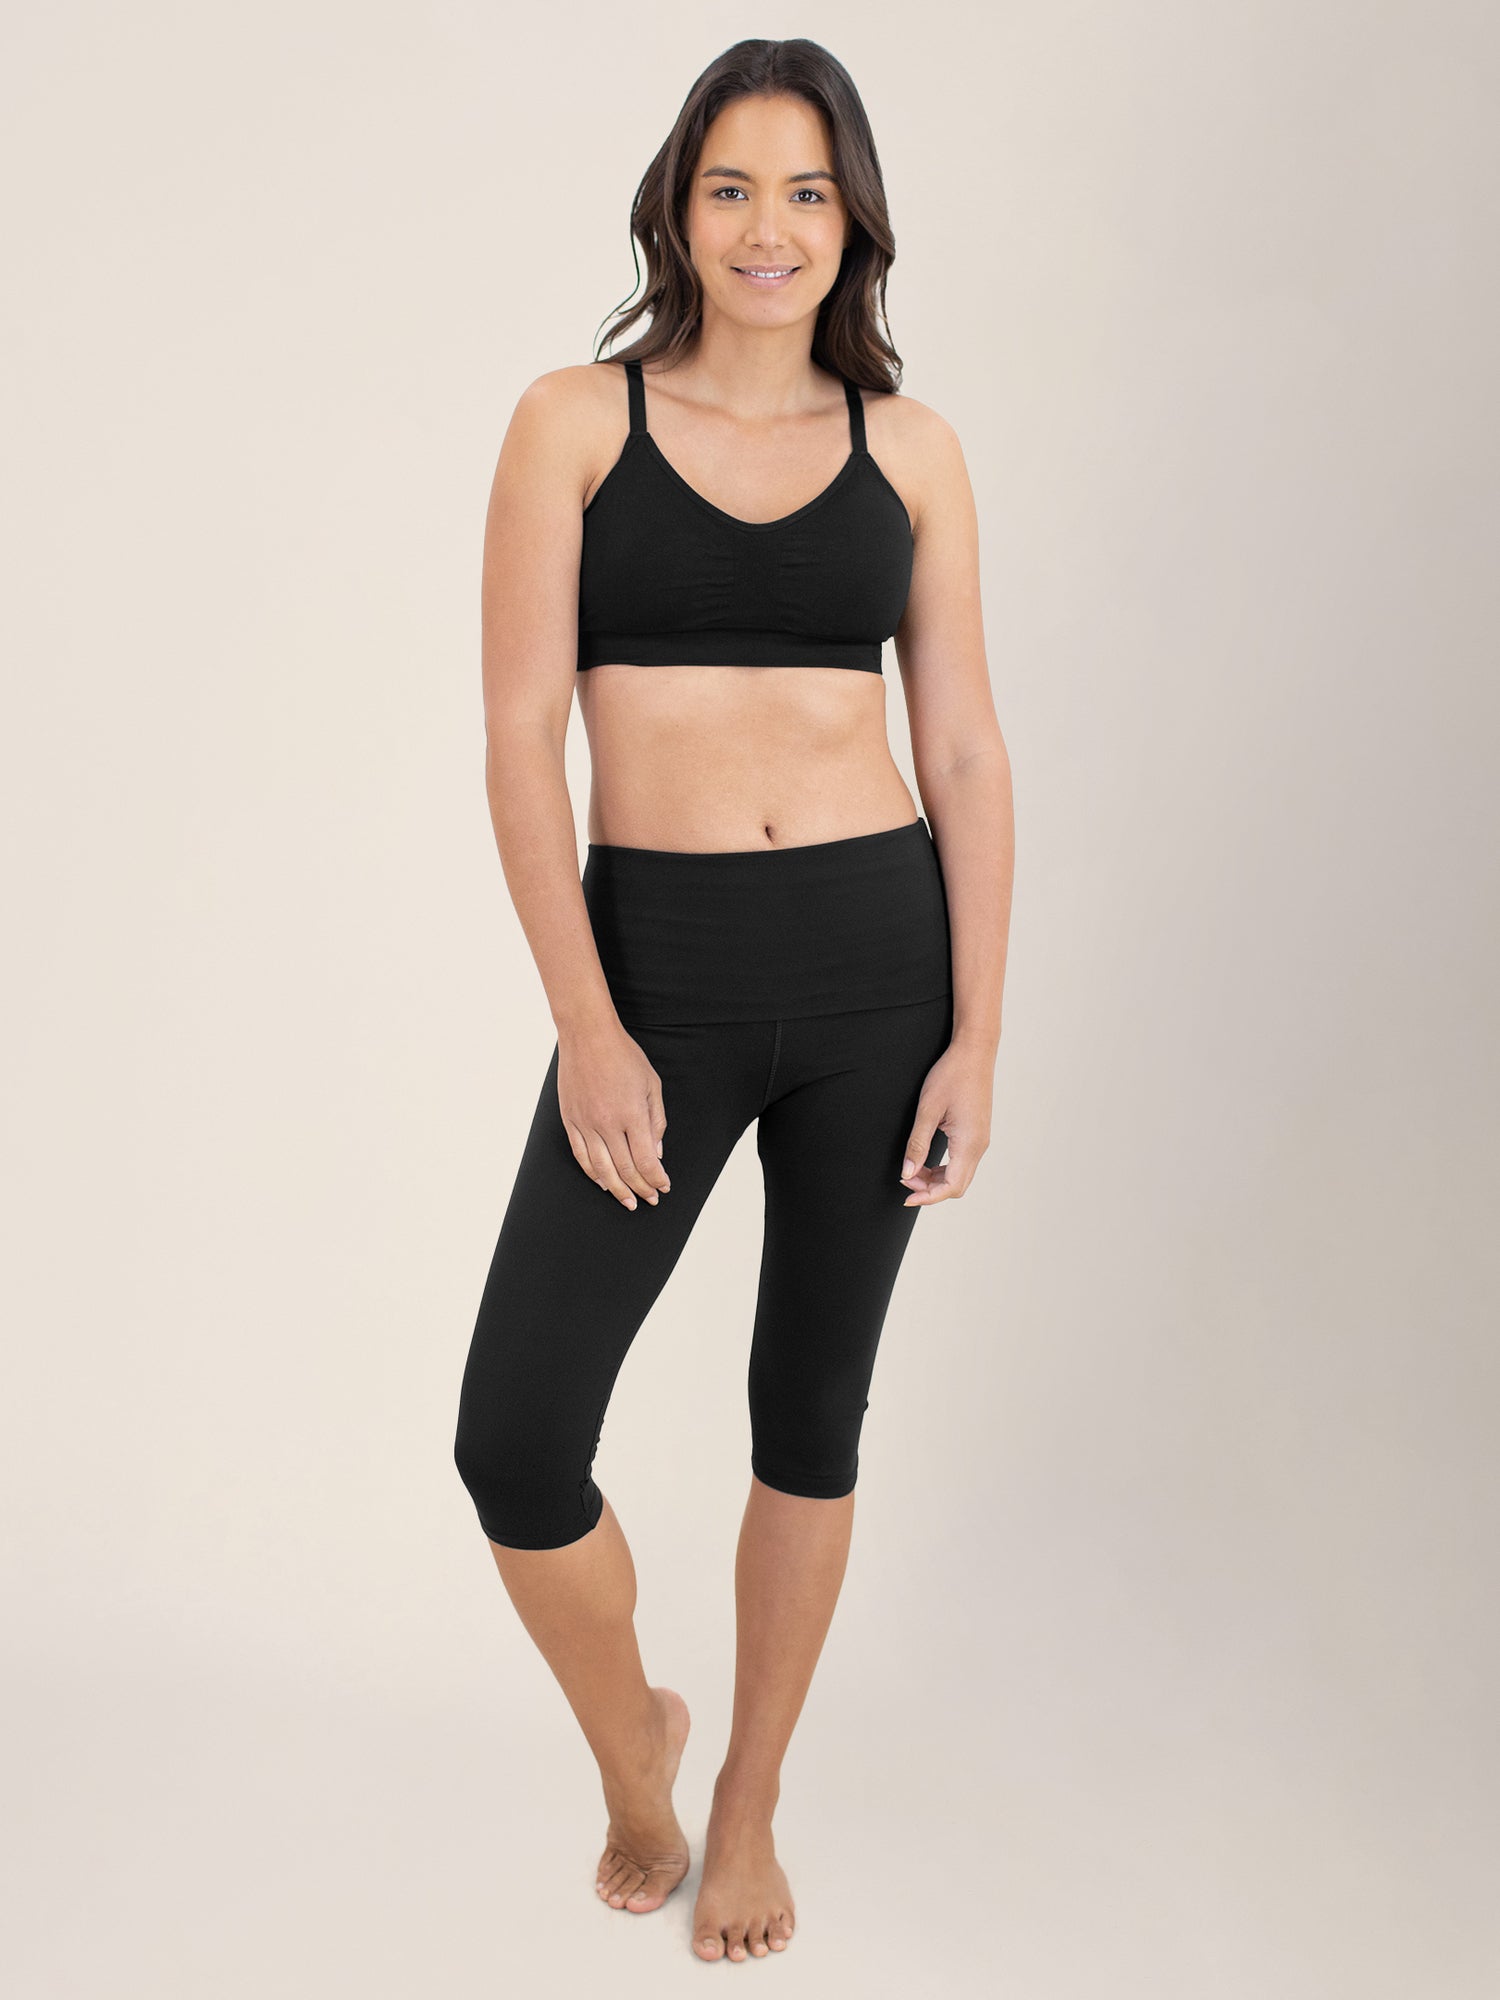 Diana Sublime® Sports Bra  Pink Heather - Kindred Bravely